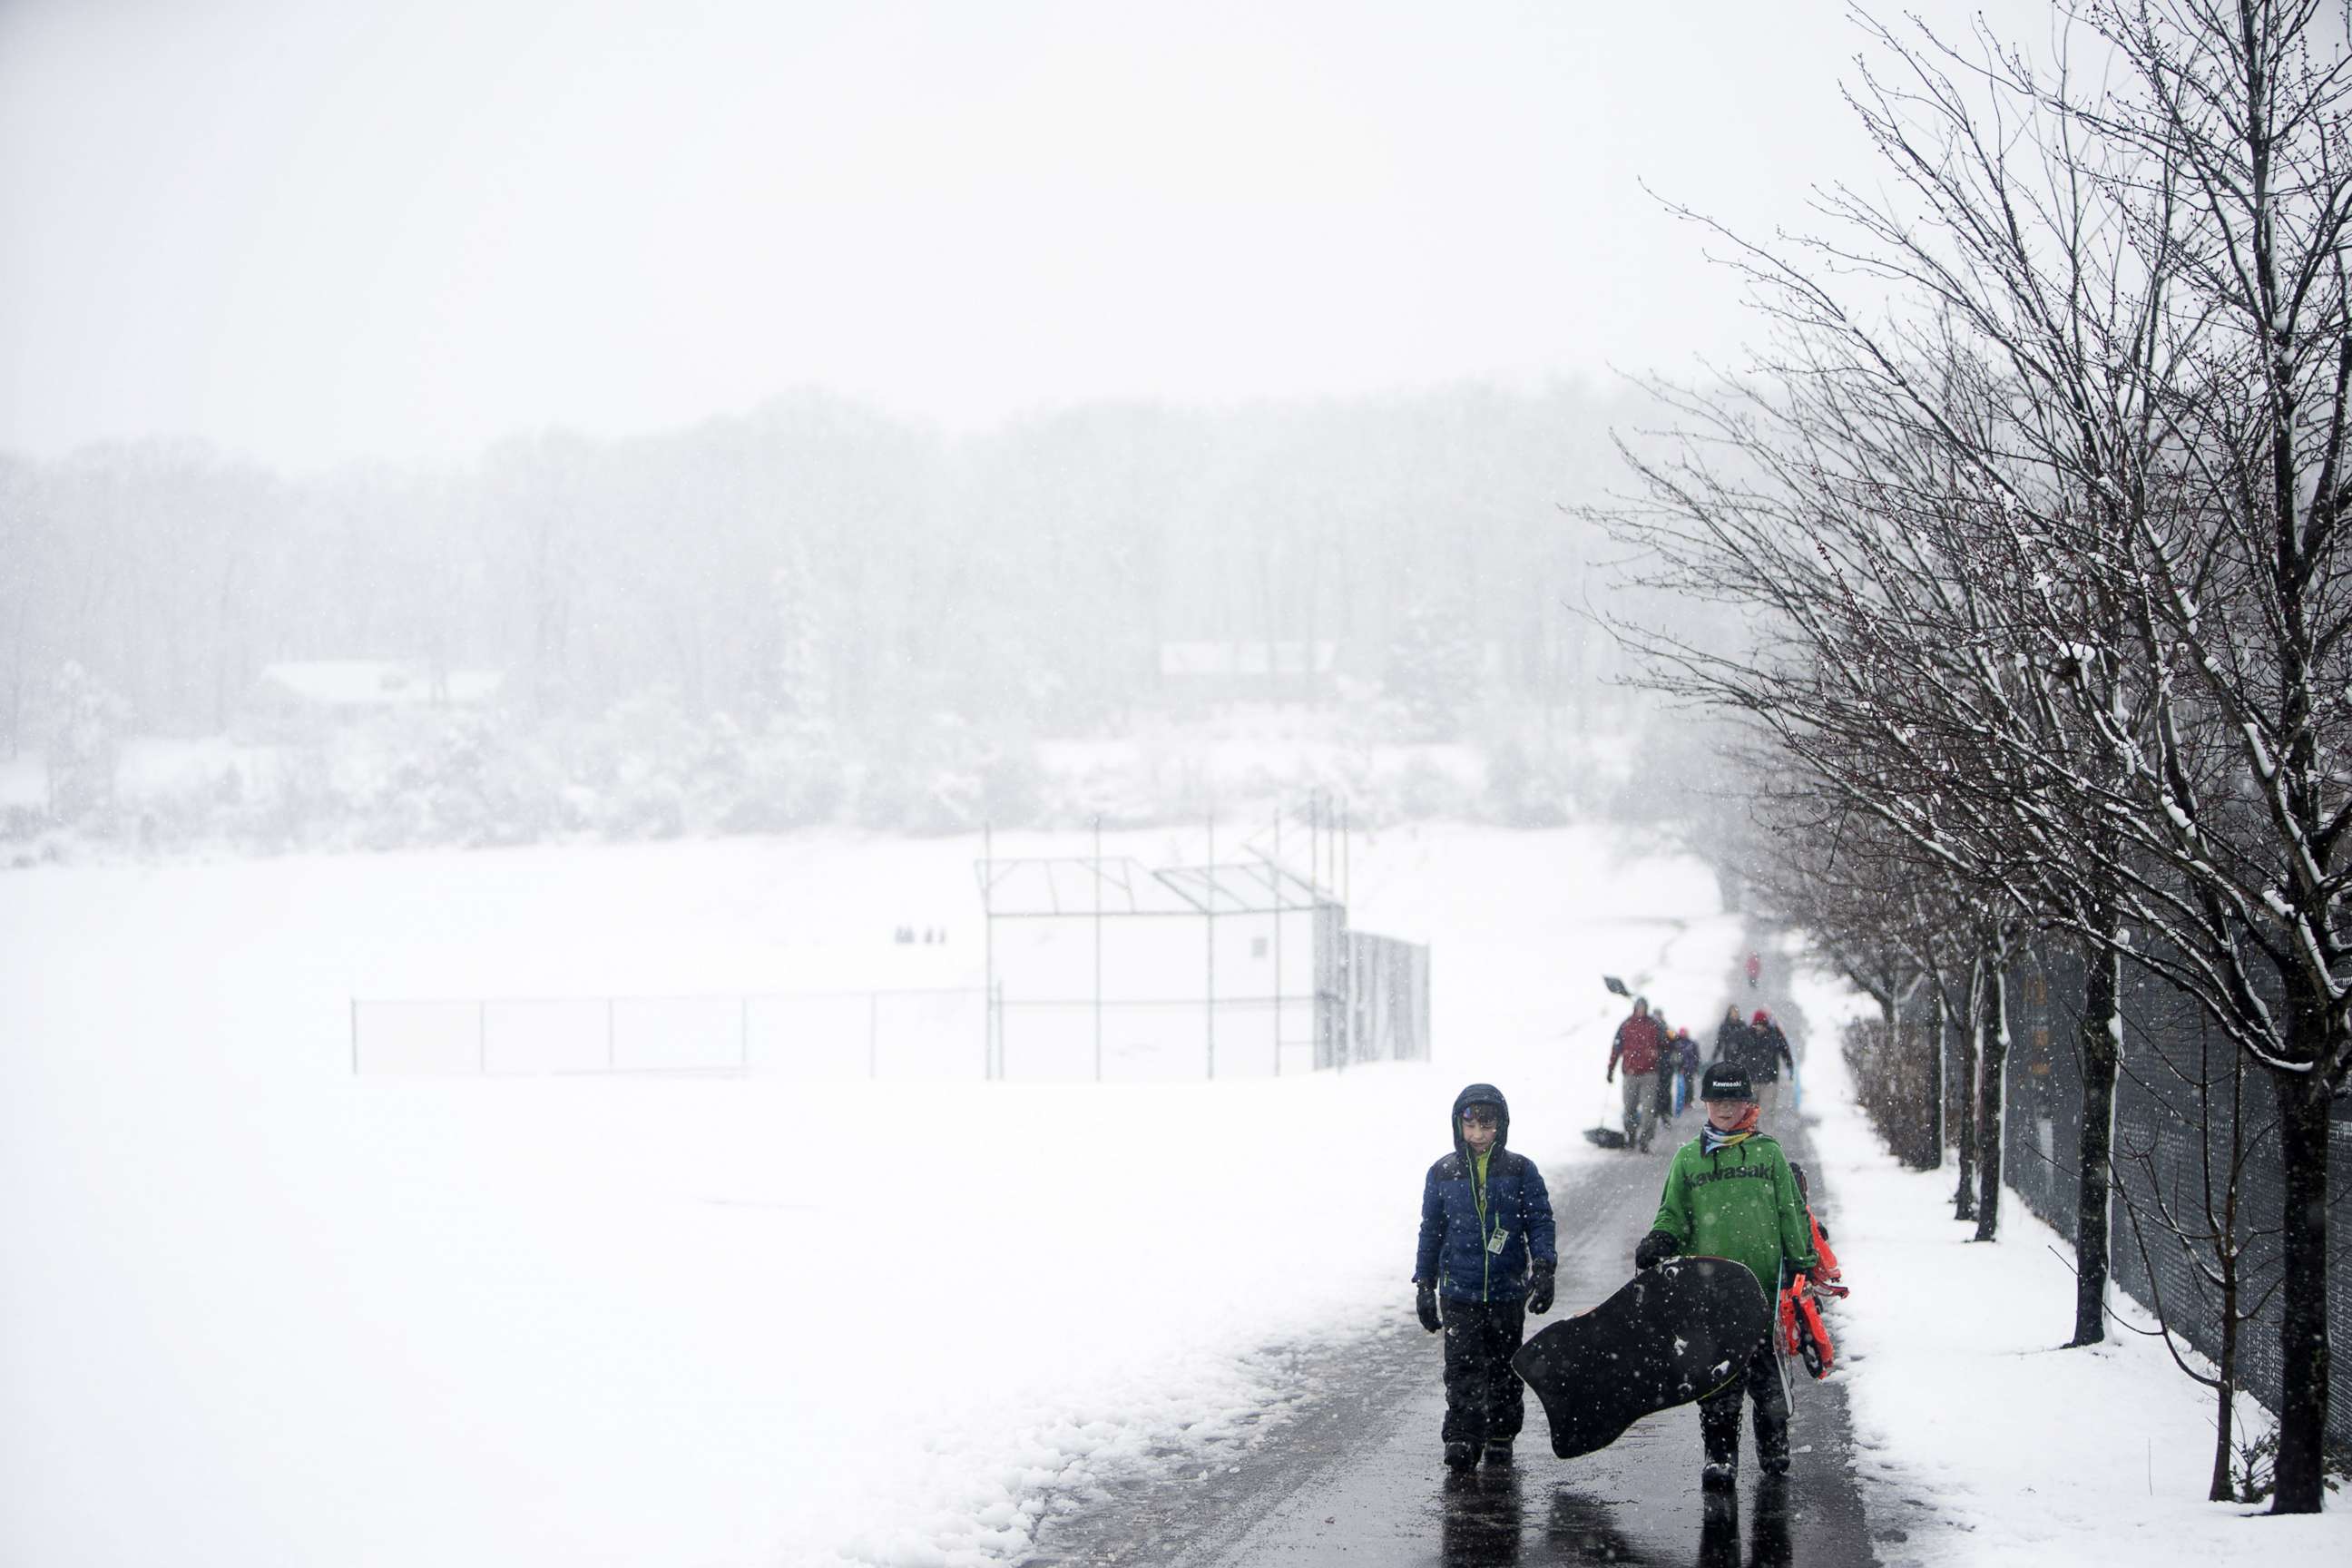 PHOTO: People drag and carry sleds through winter weather on March 7, 2018 in Perkasie, Pennsylvania.